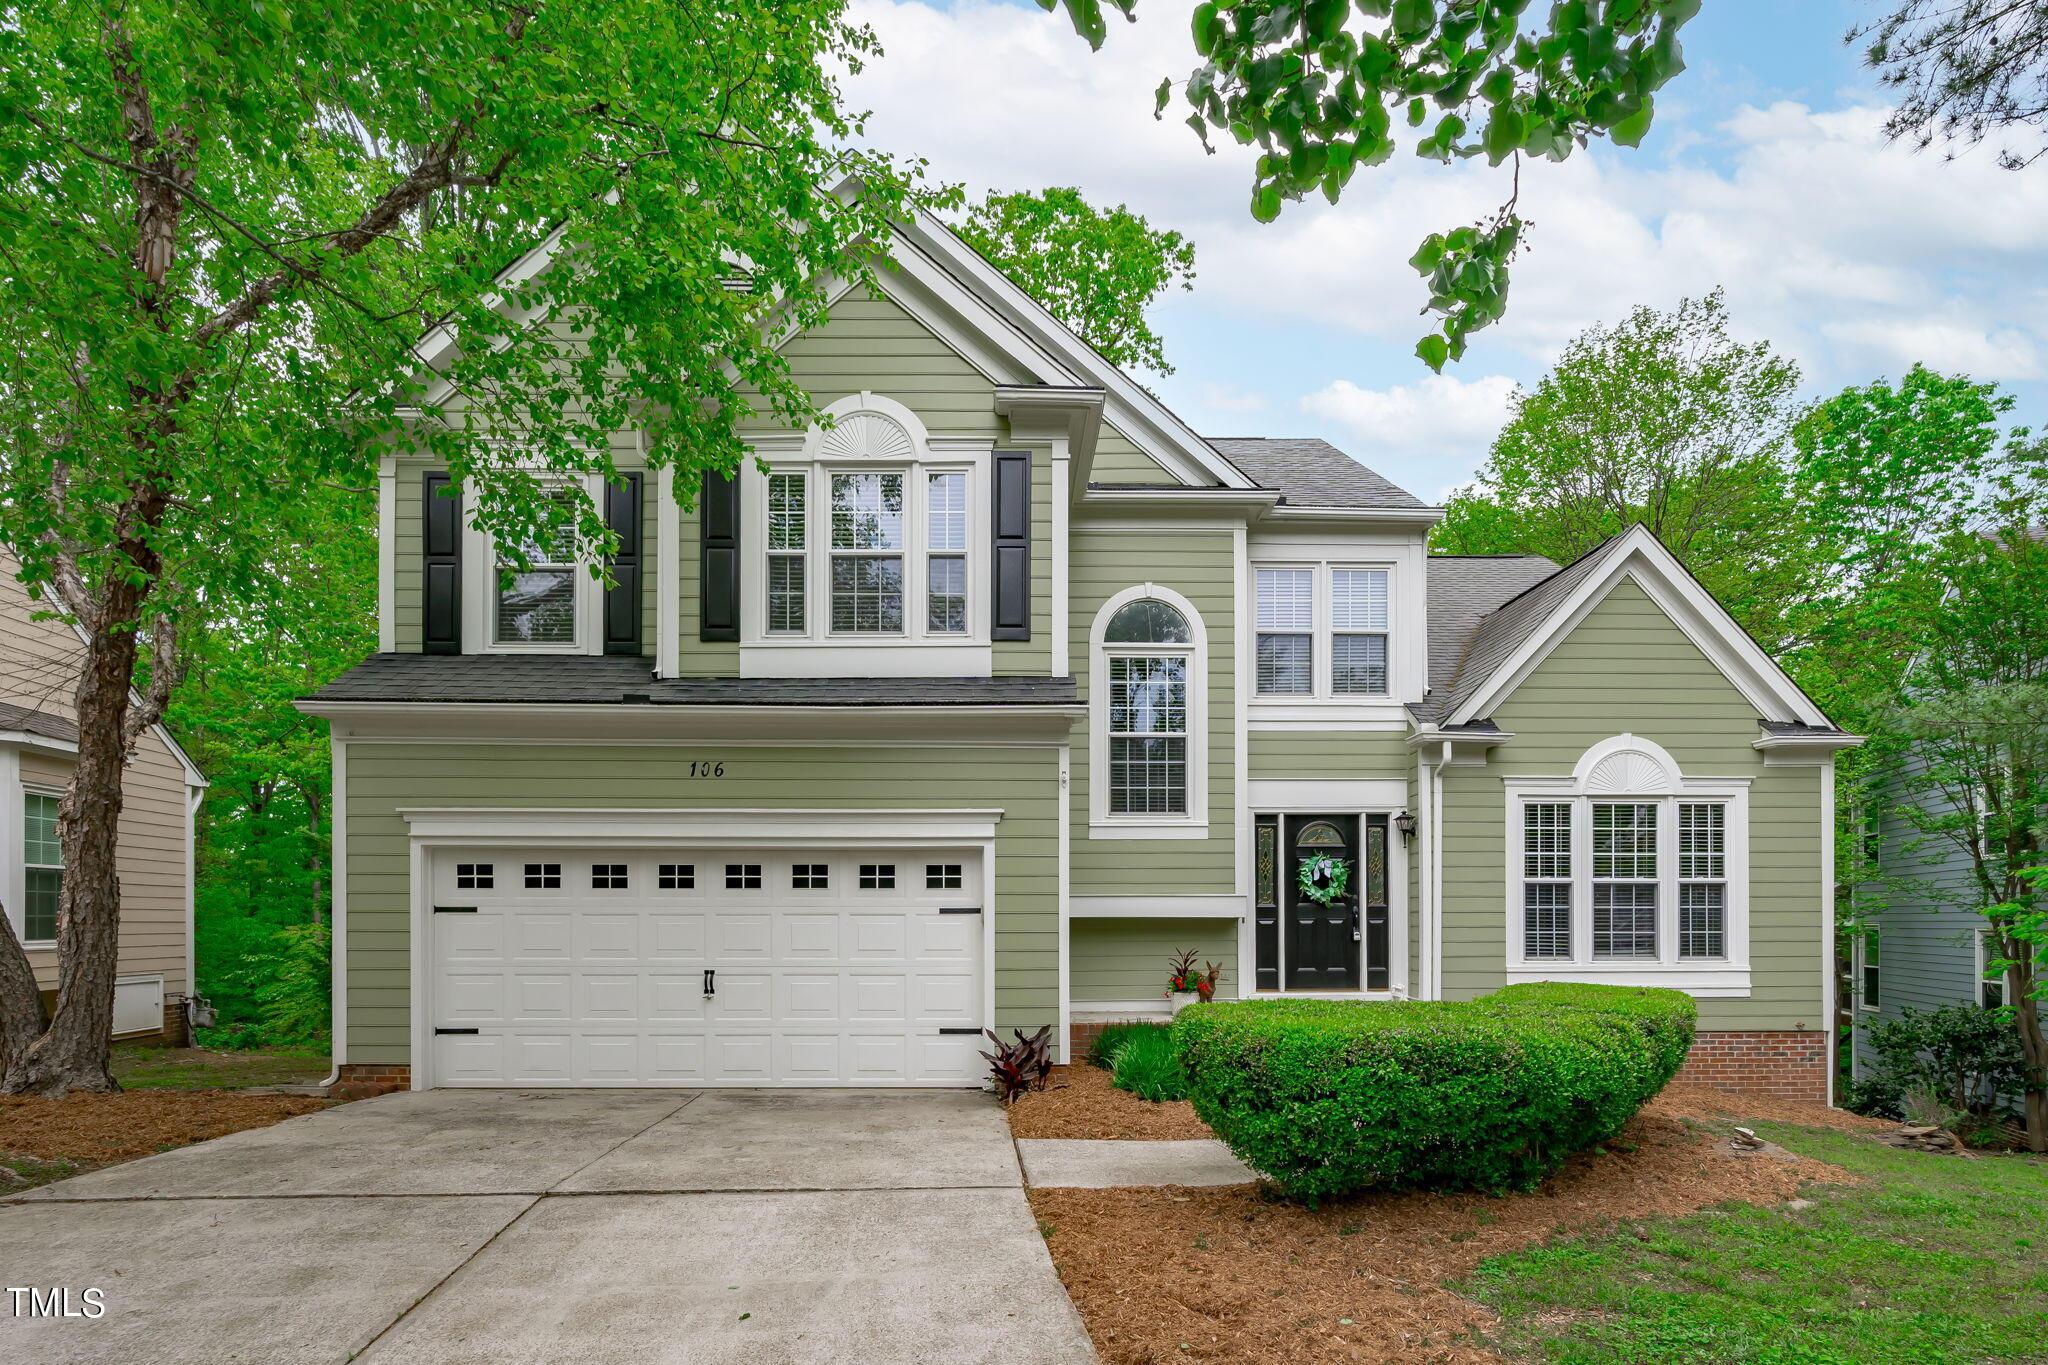 Photo one of 106 Swiss Lake Dr Cary NC 27513 | MLS 10023938